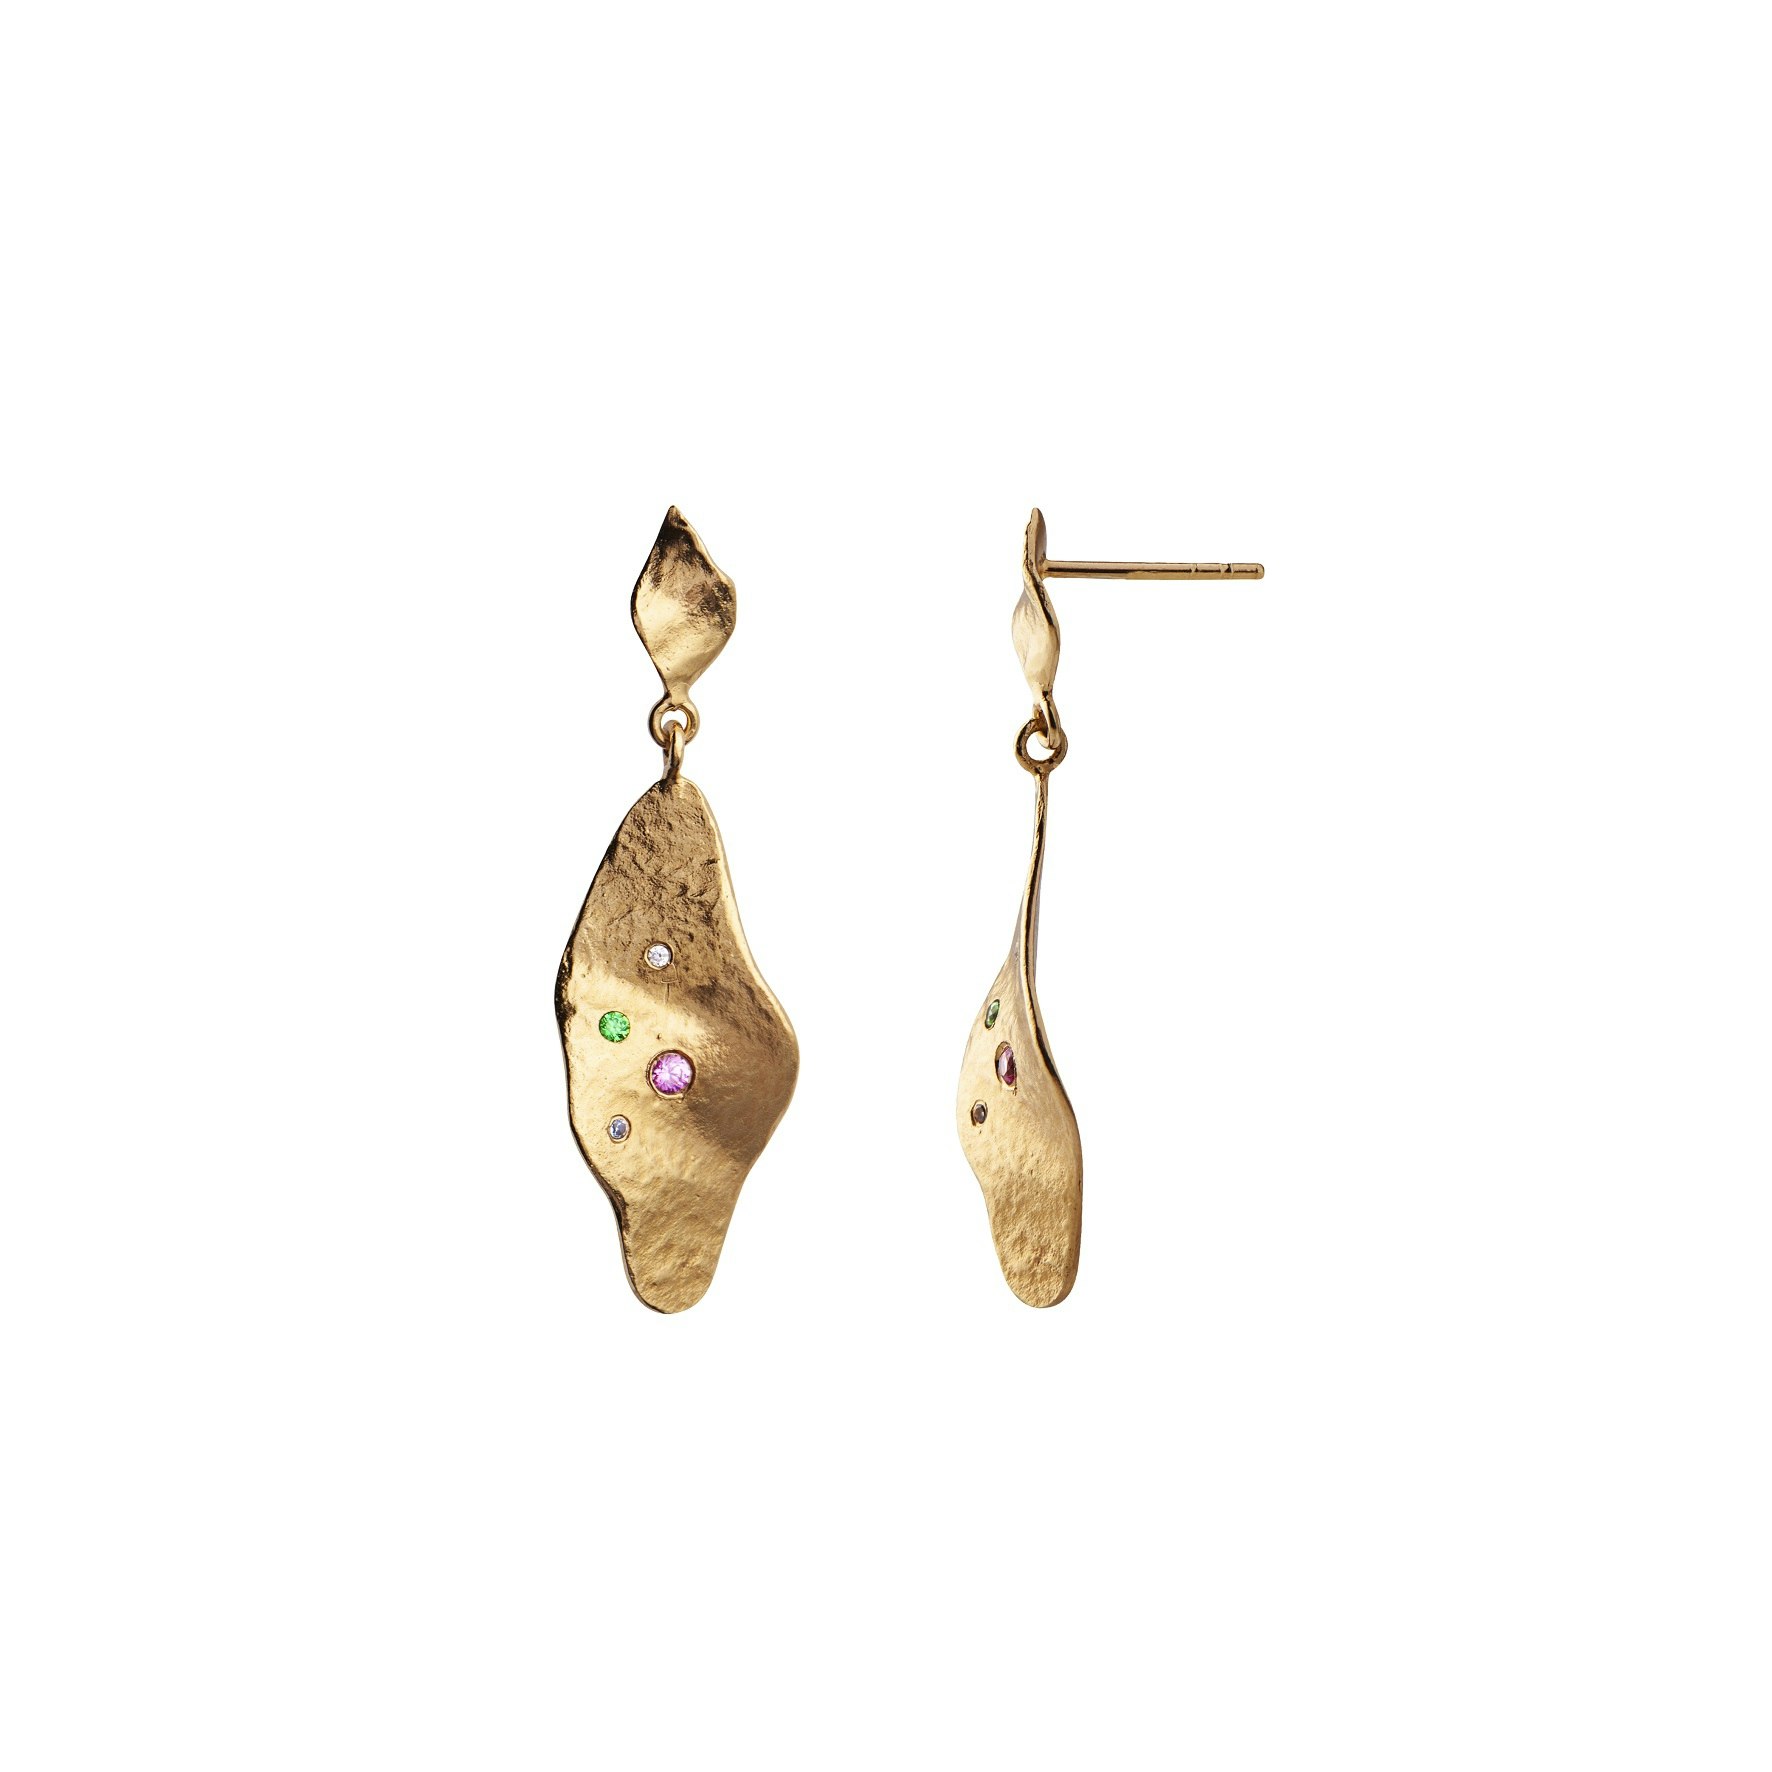 Dangling Ile De L'Amour Earring With Stones van STINE A Jewelry in Verguld-Zilver Sterling 925